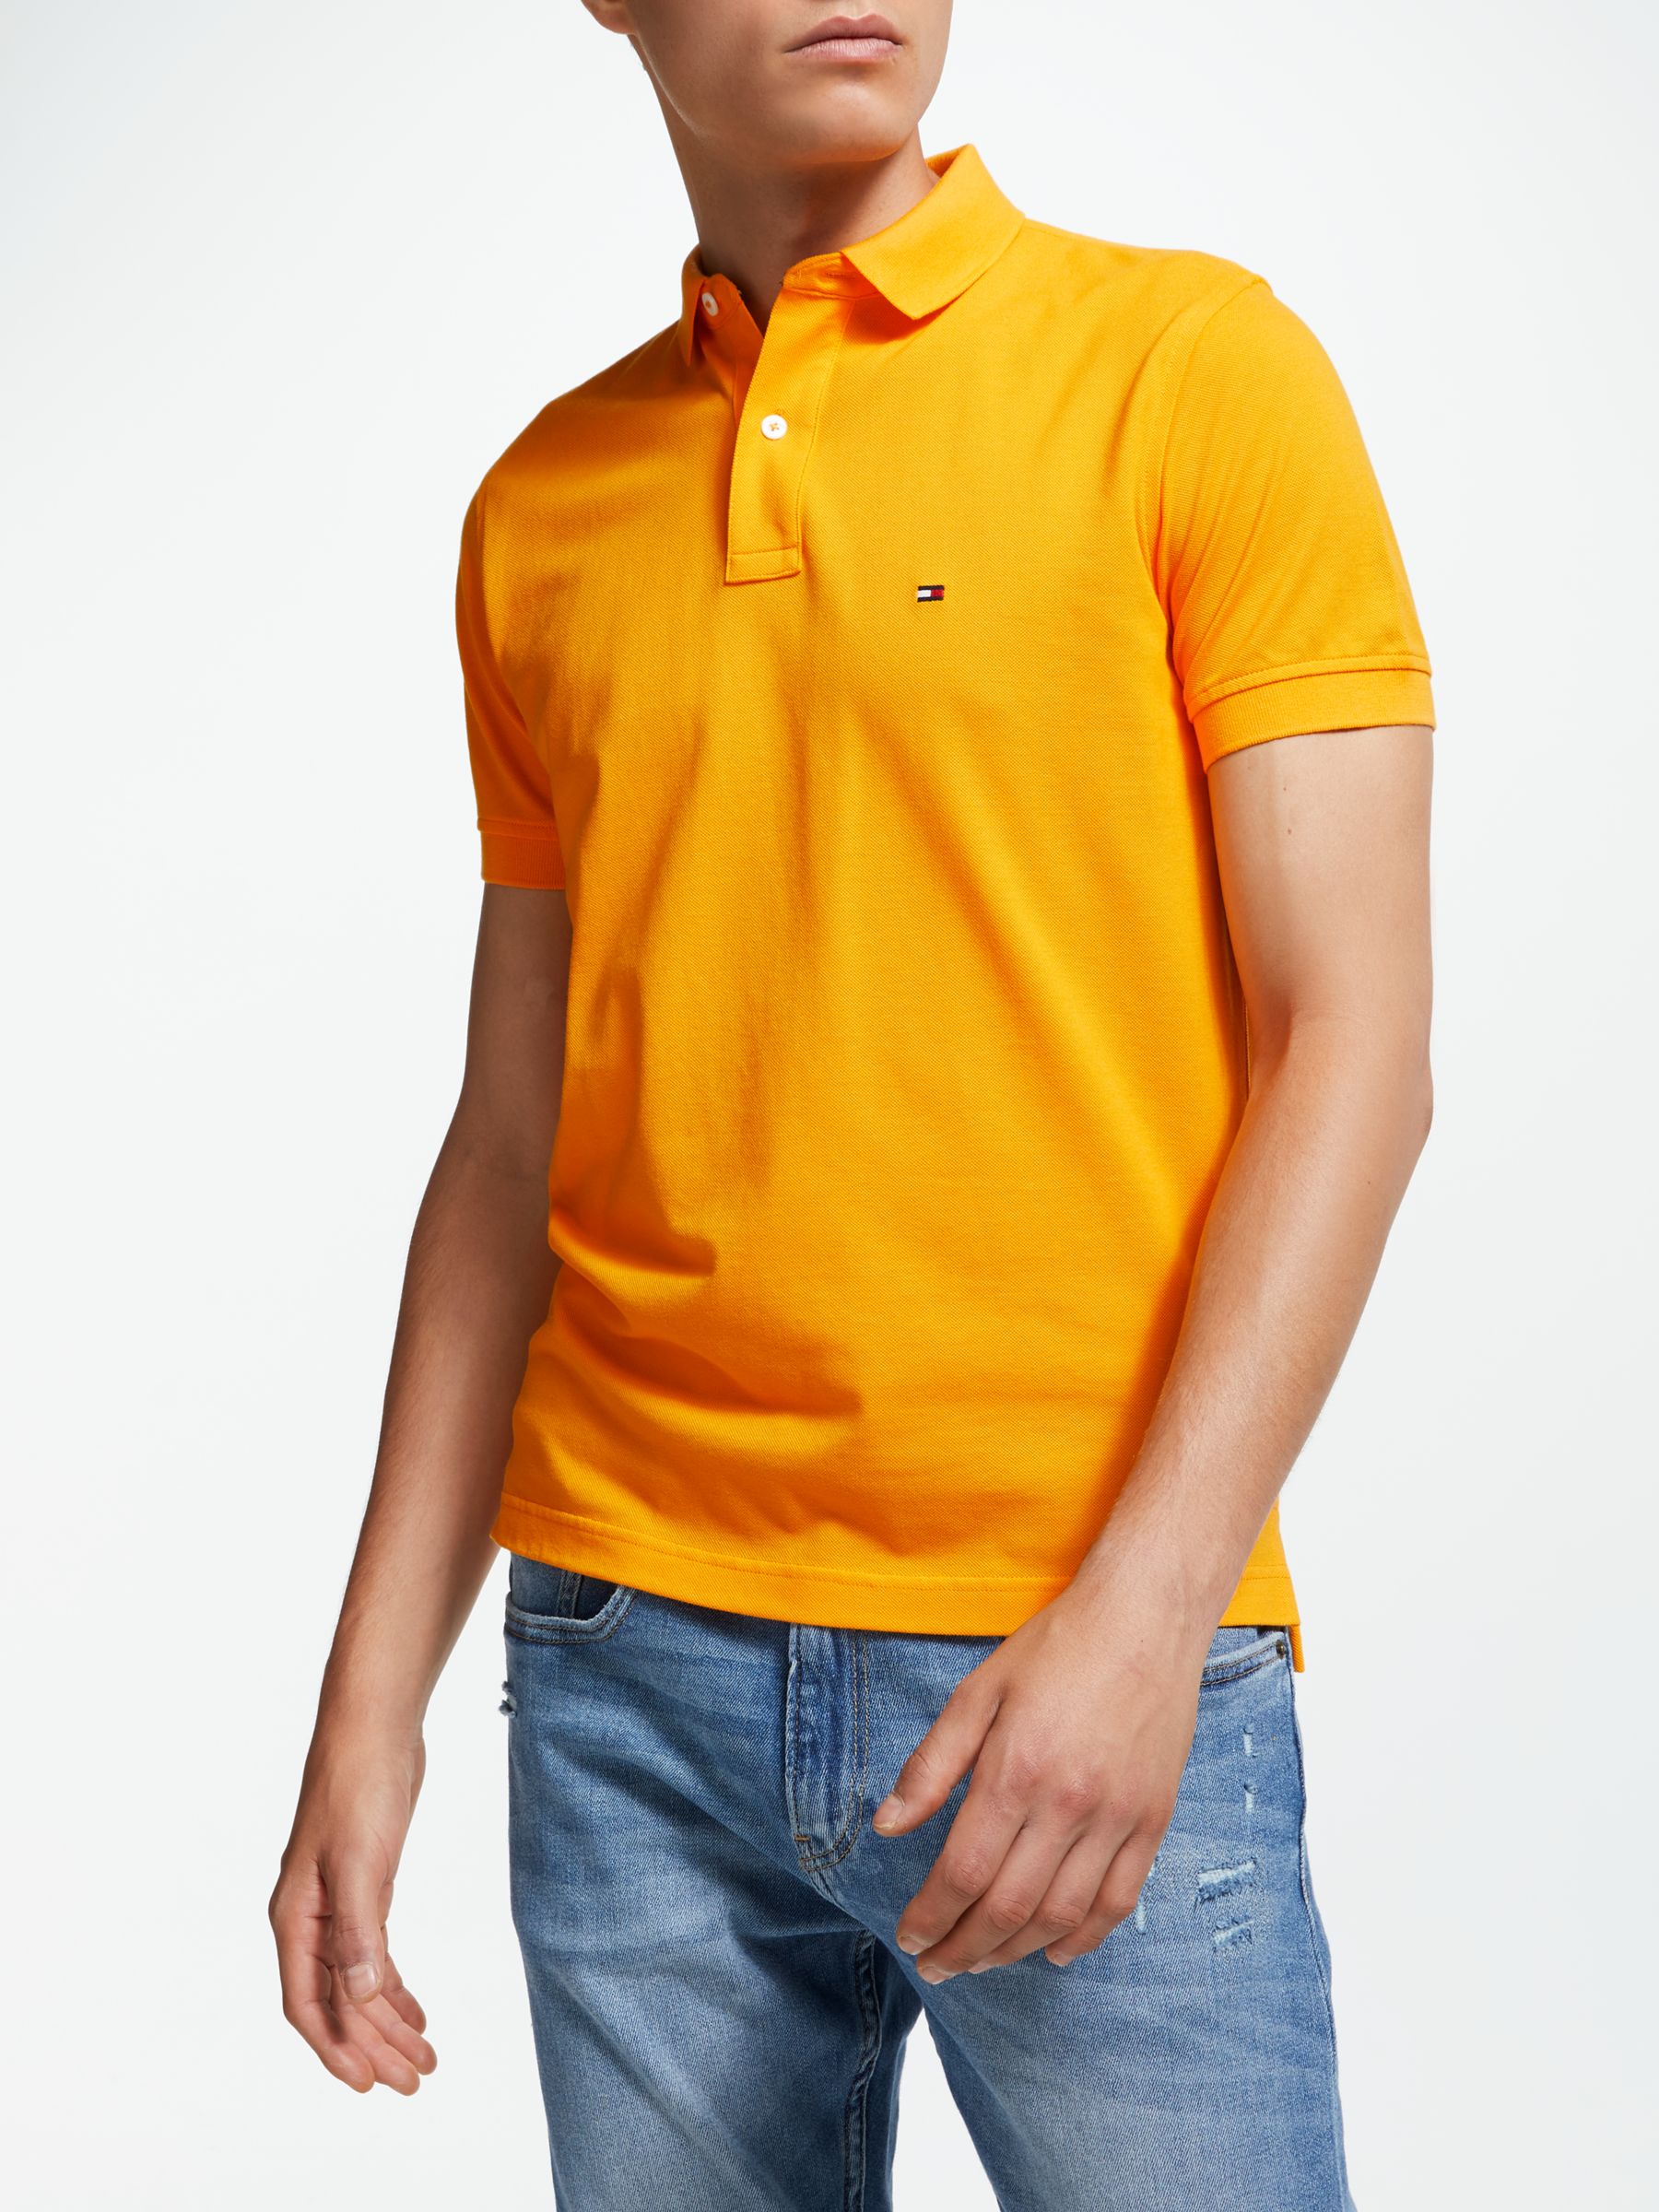 tommy hilfiger polo shirt yellow